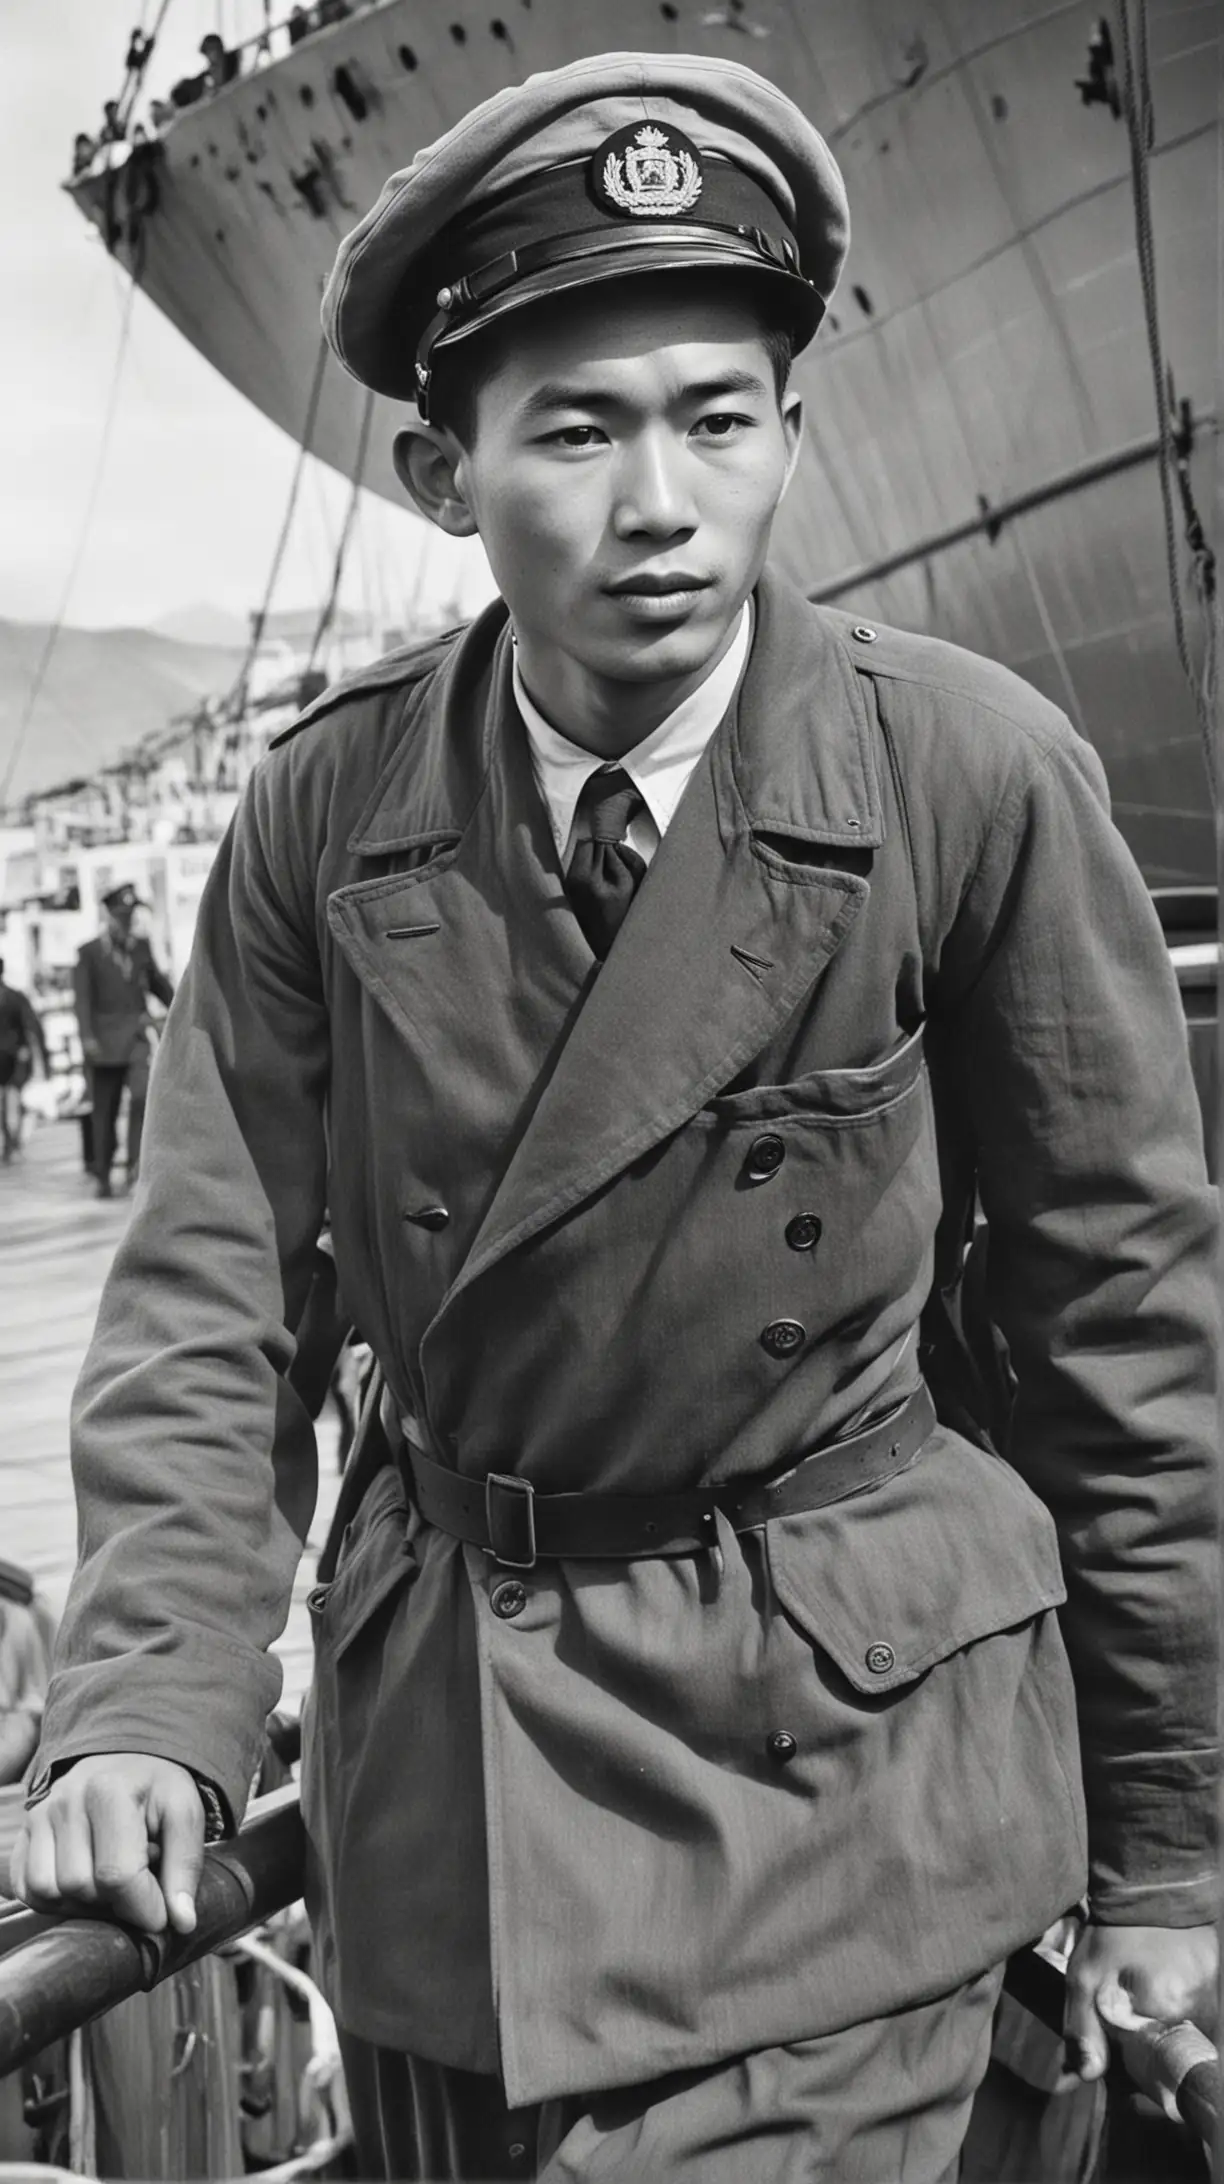 The image depicts 24-year-old Chinese mariner Pan Lyan boarding the English trading ship in Cape Town in 1942, his youthful face filled with determination as he embarks on what he assumes will be a routine journey.